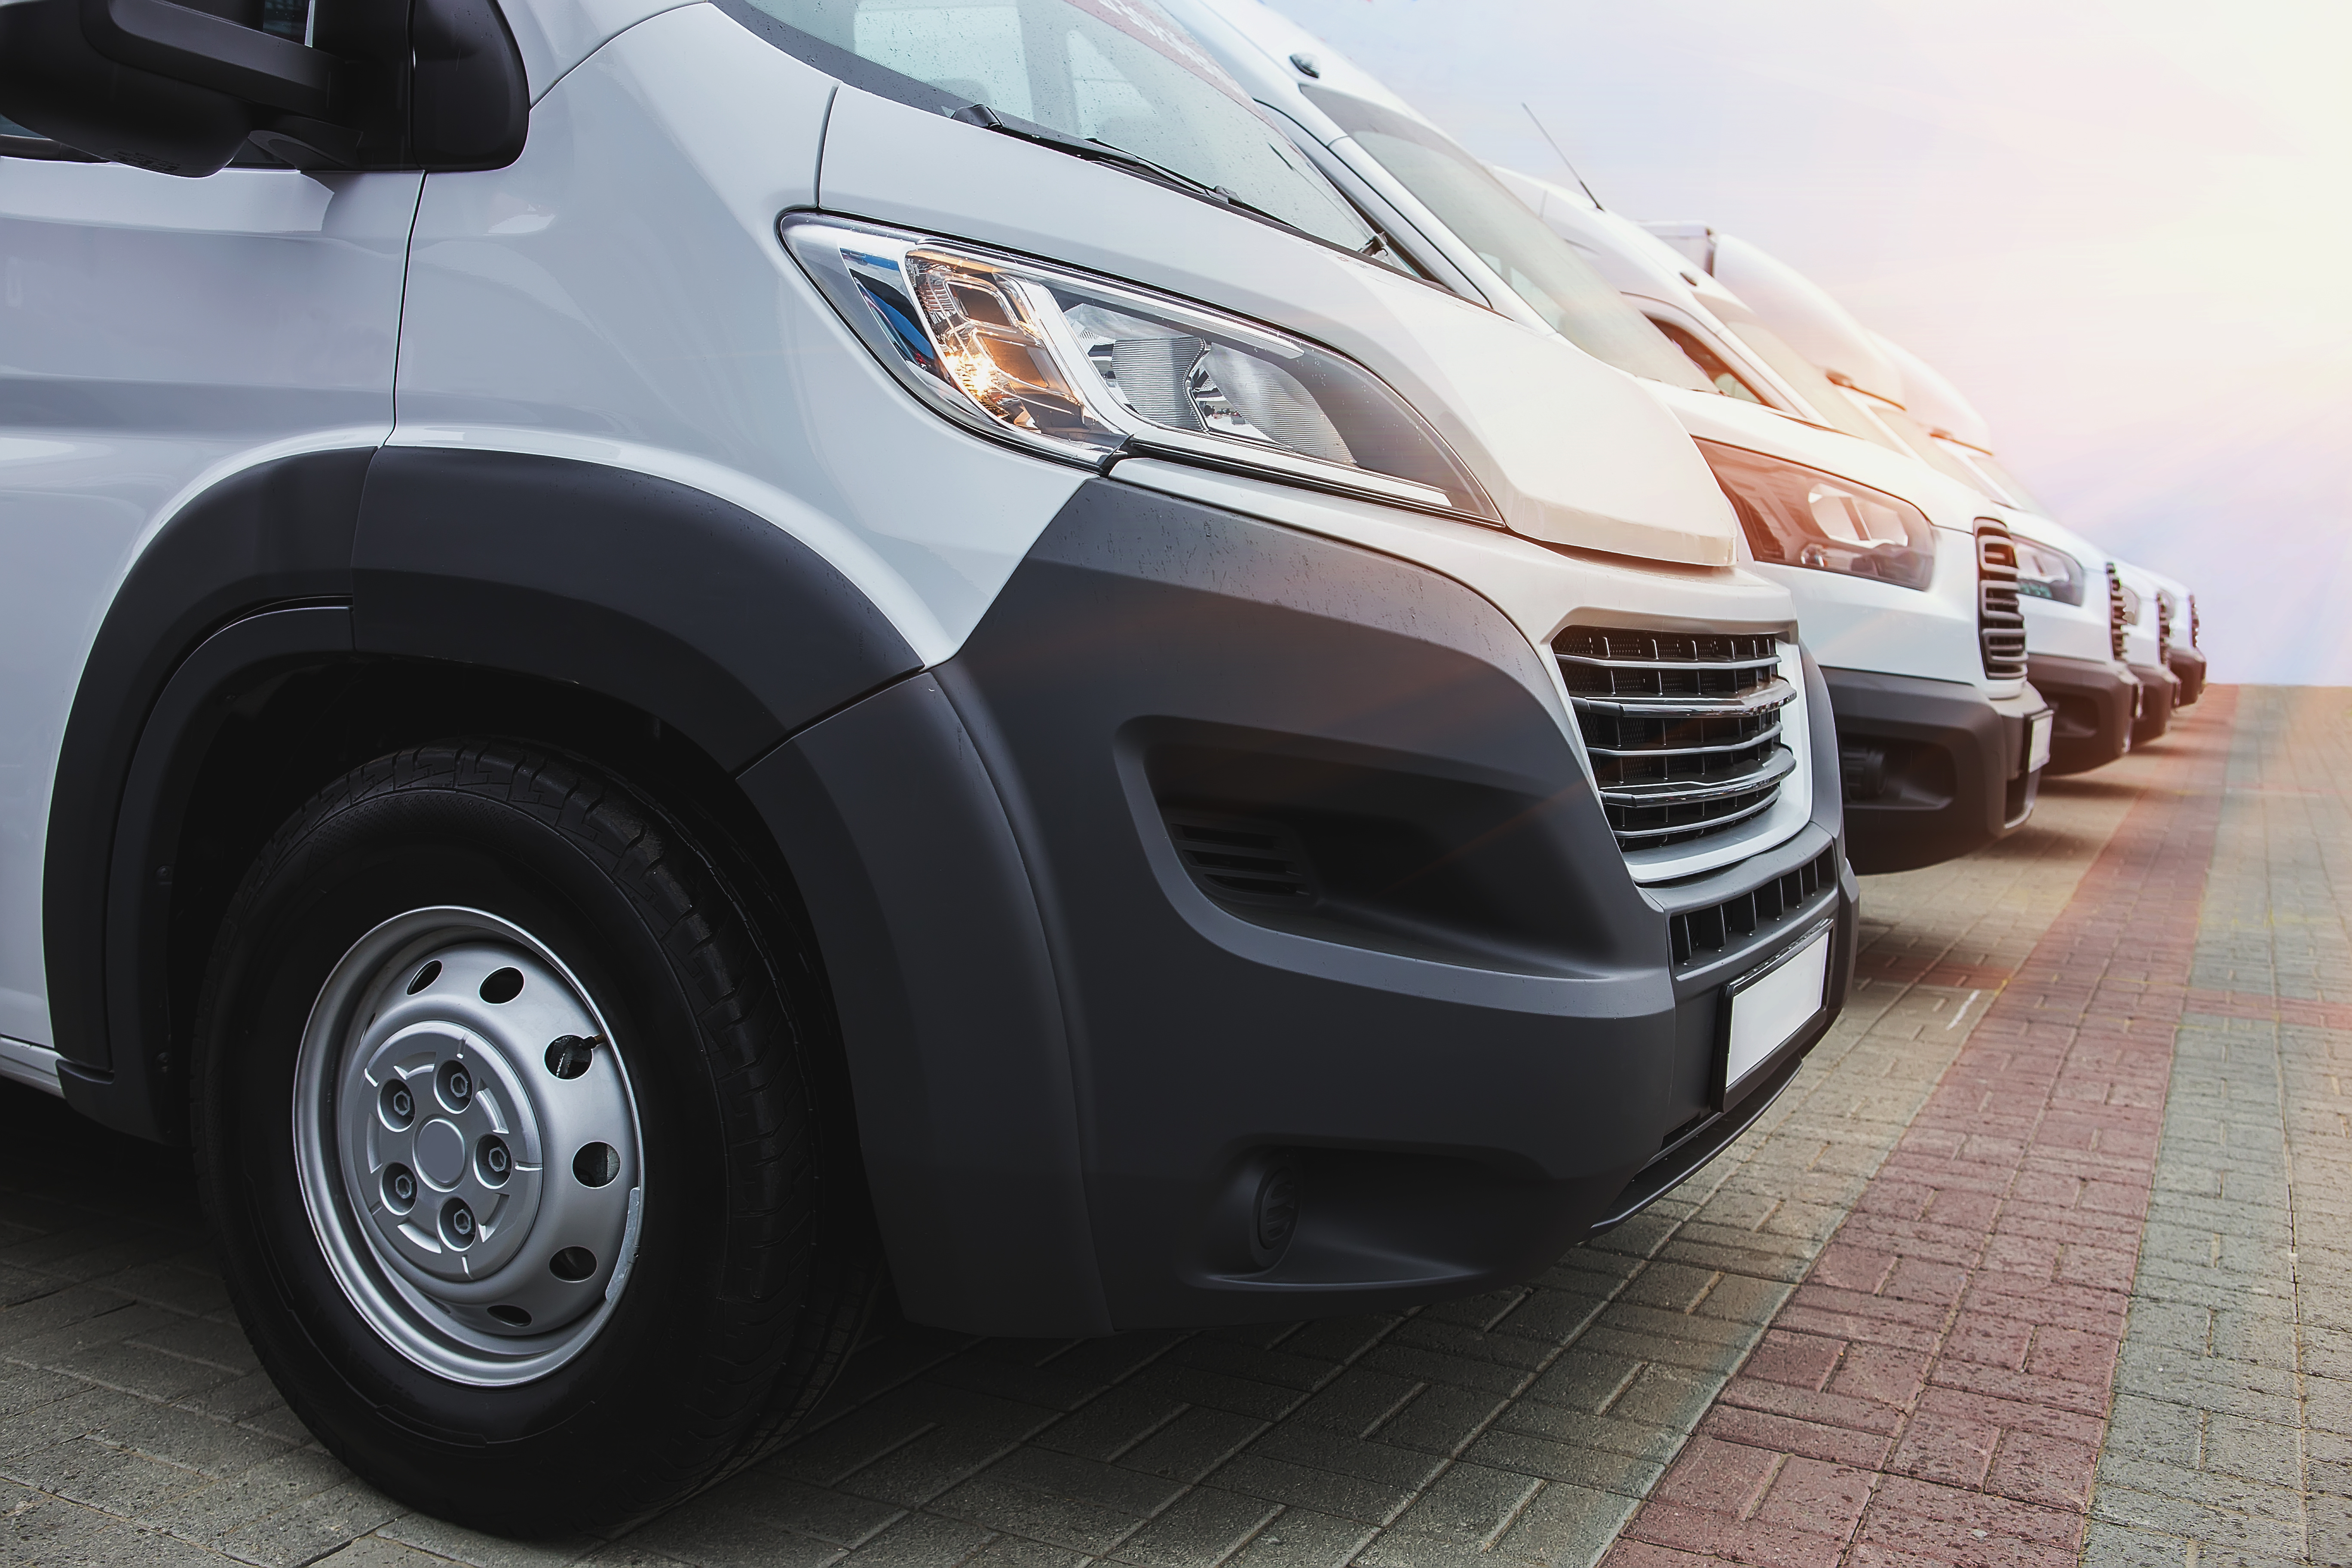 Maintenance Tips for your Fleet of Vehicles